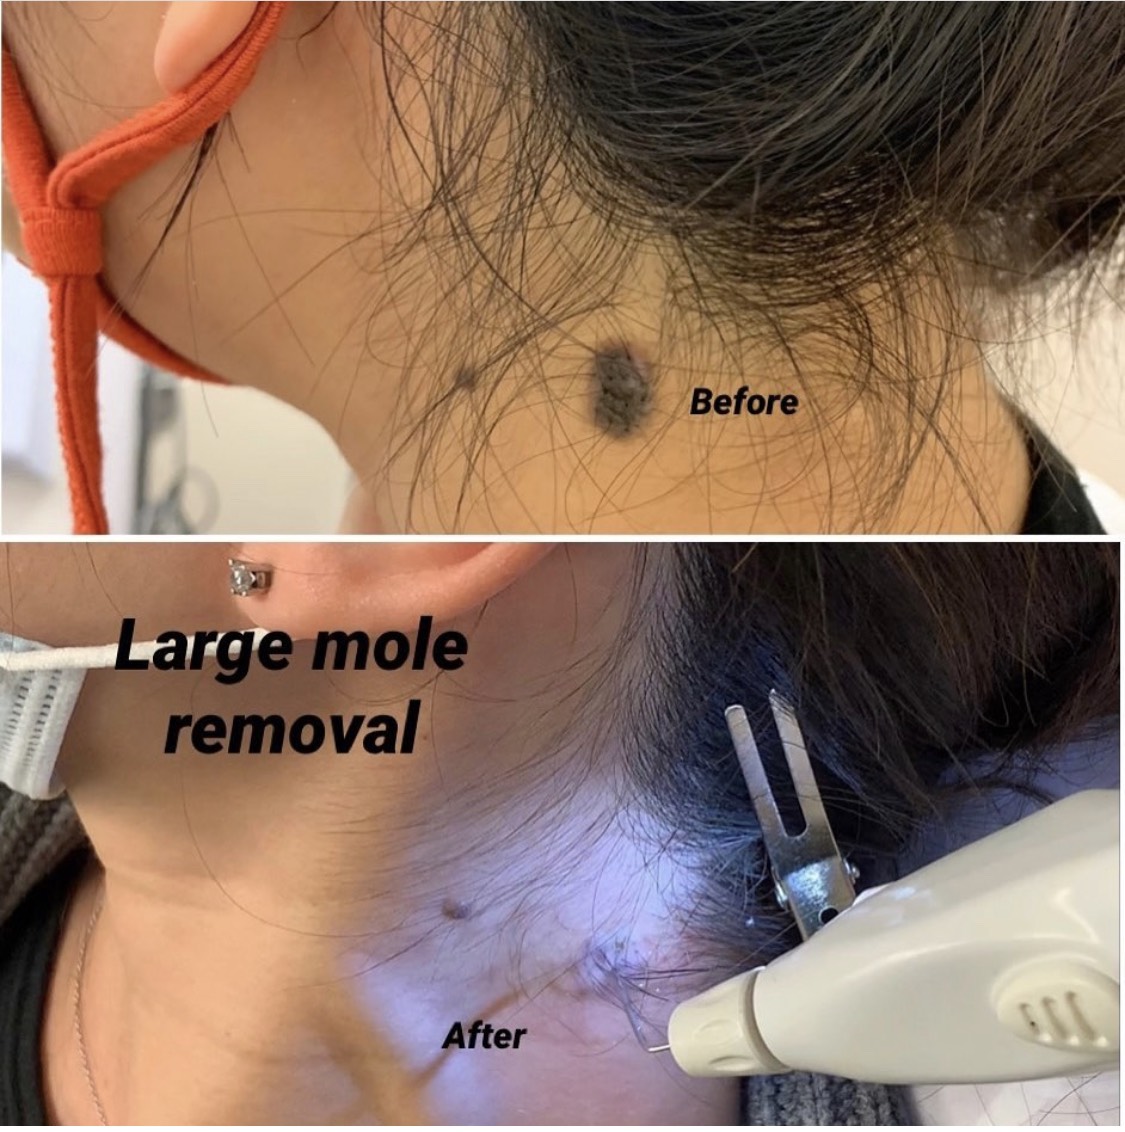 Thus large mole needed both laser and Plexr Plasma to remove. 